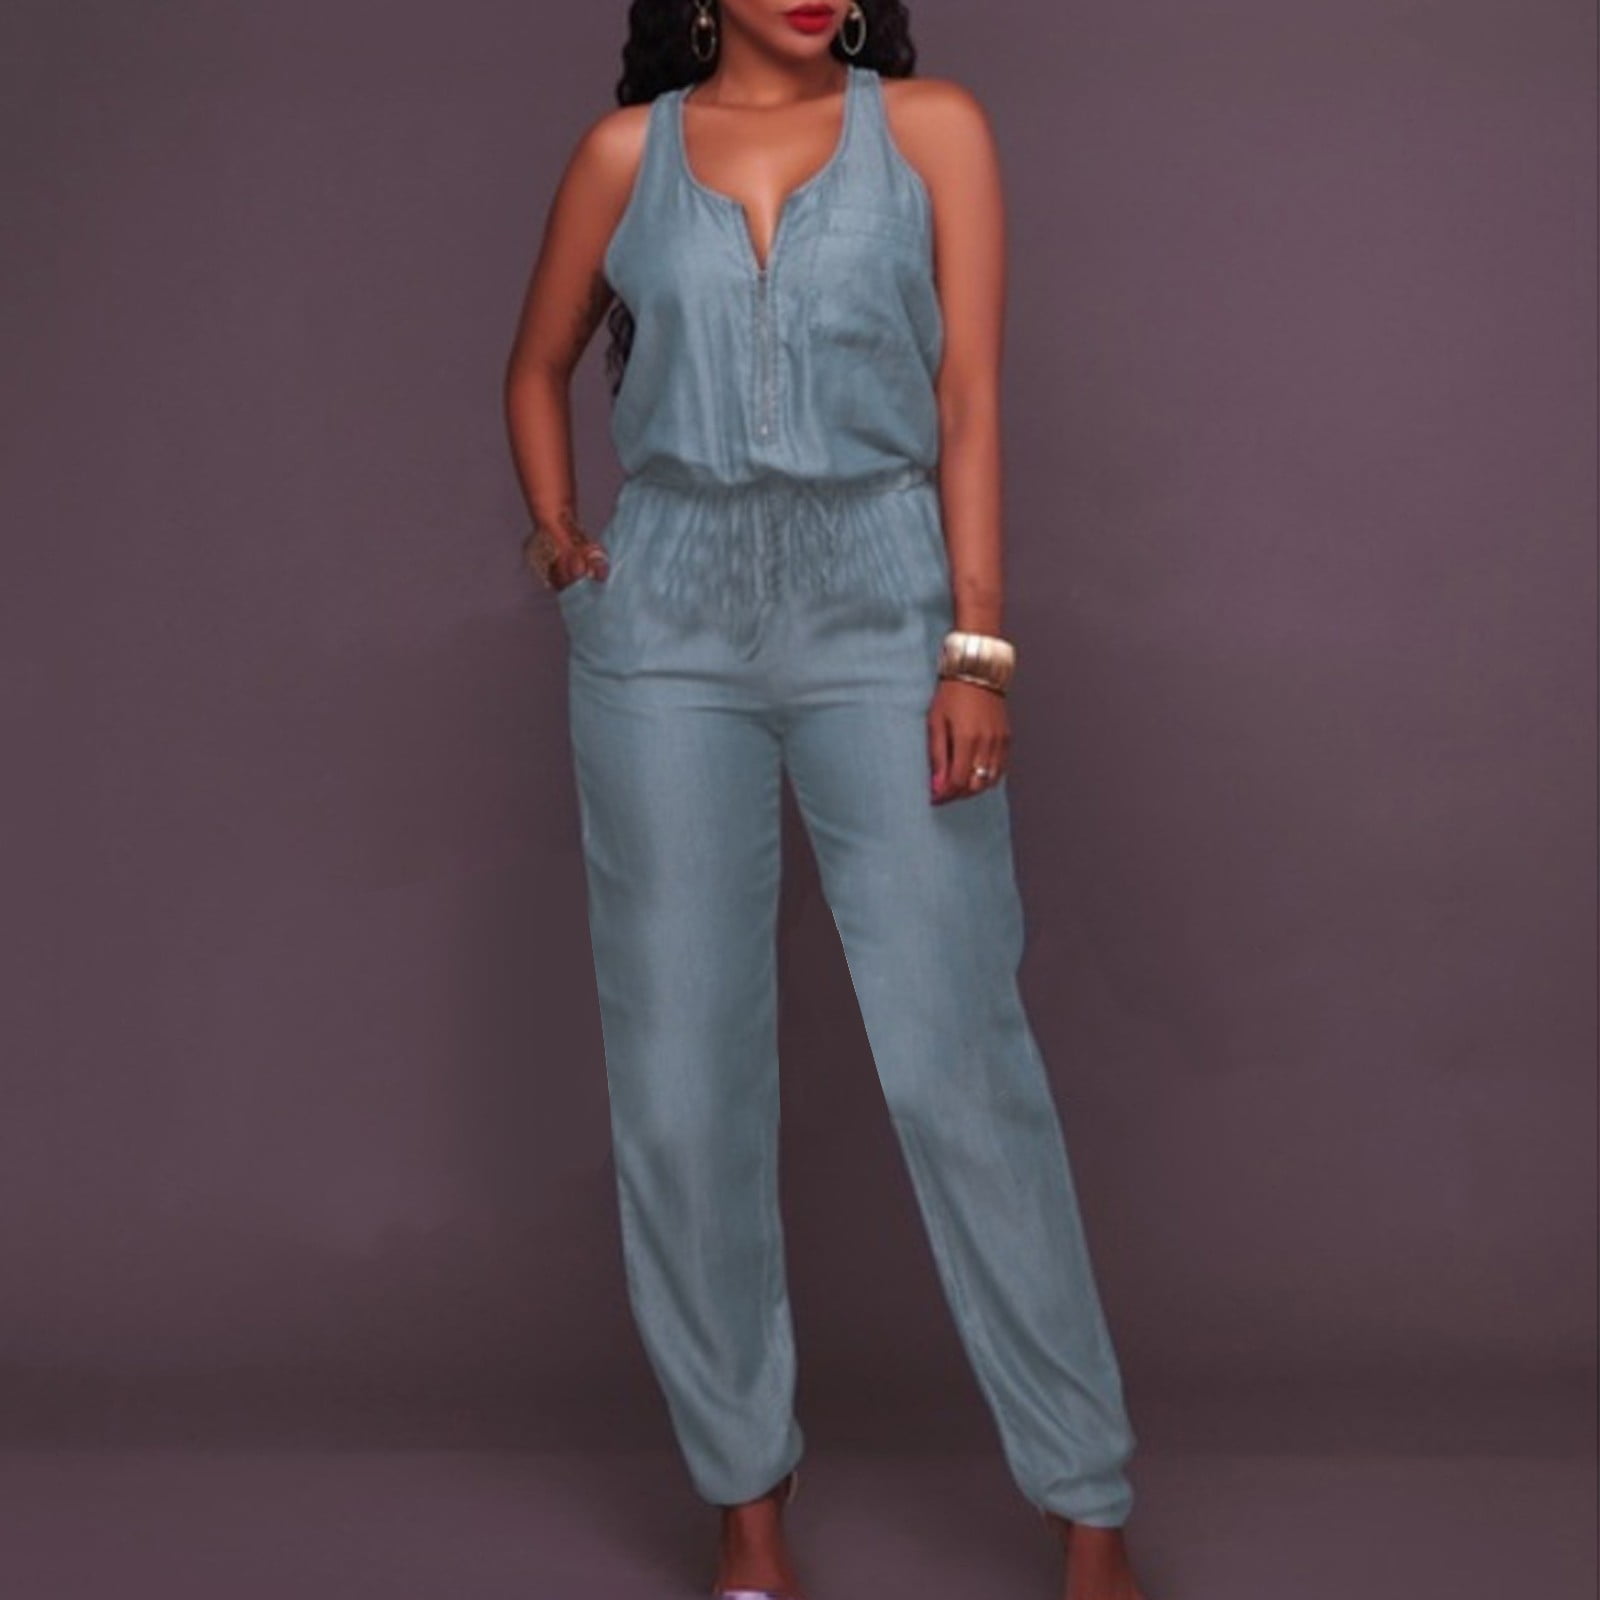 yoeyez Summer Womens Jumpsuits and Rompers Womens Casual Off Shoulder Denim Jeans Pocket Sleeveless Jumpsuits Rompers Monos, Y Overoles Para Mujer - Walmart.com